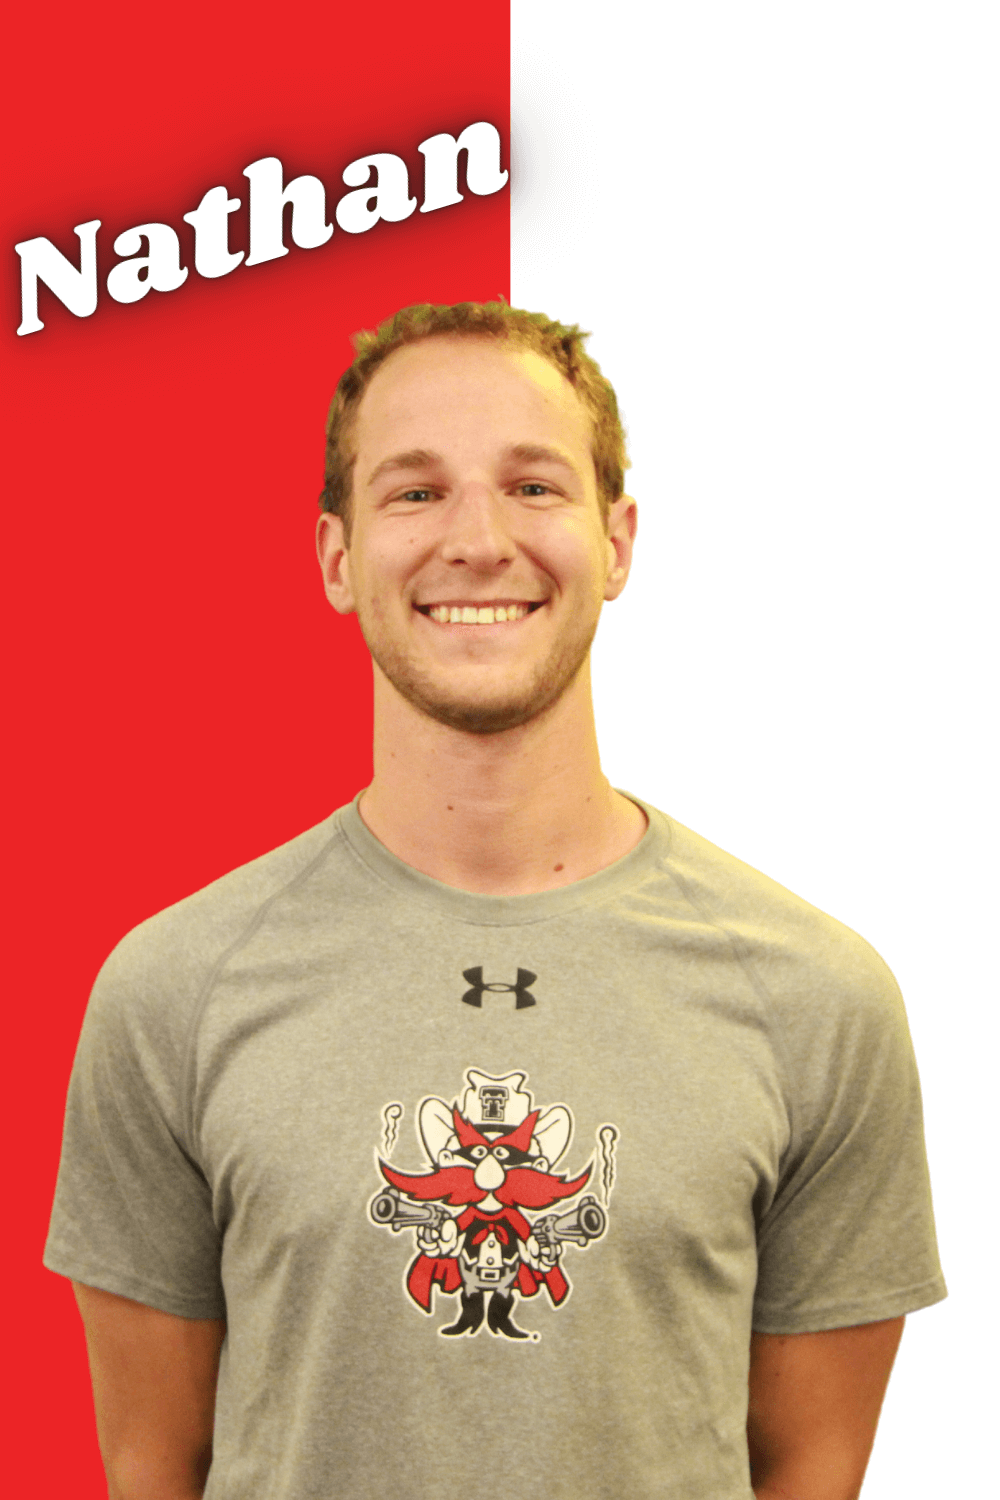 Nathan Dudley, RRC Counselor